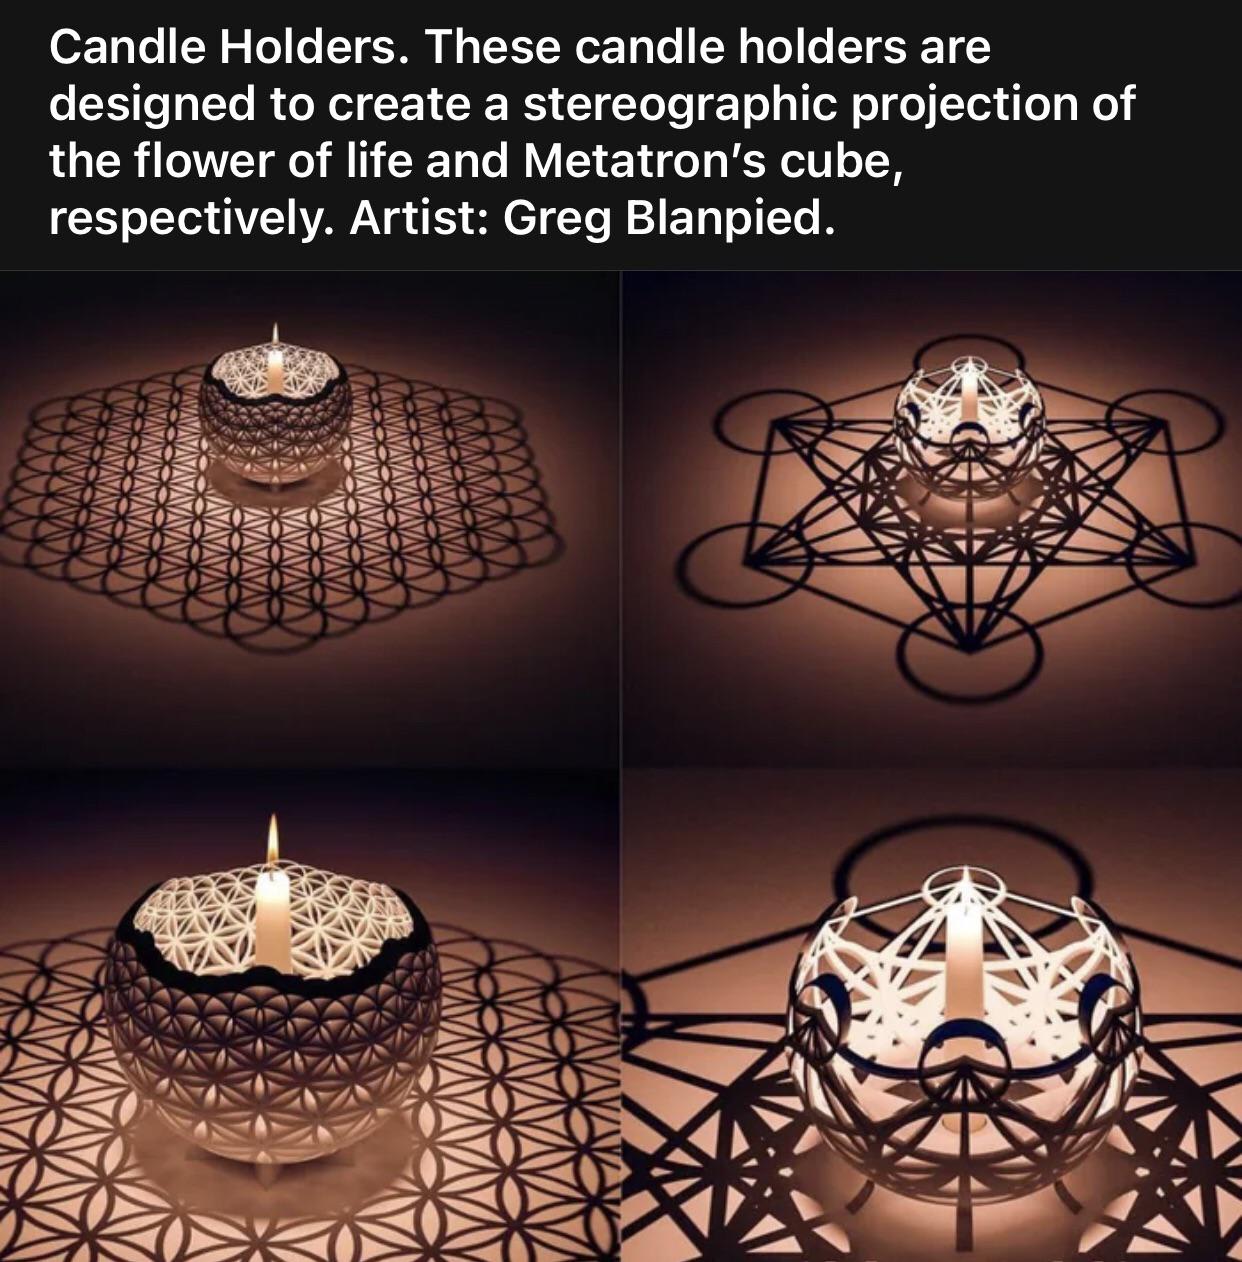 Candle holder stereographic projection